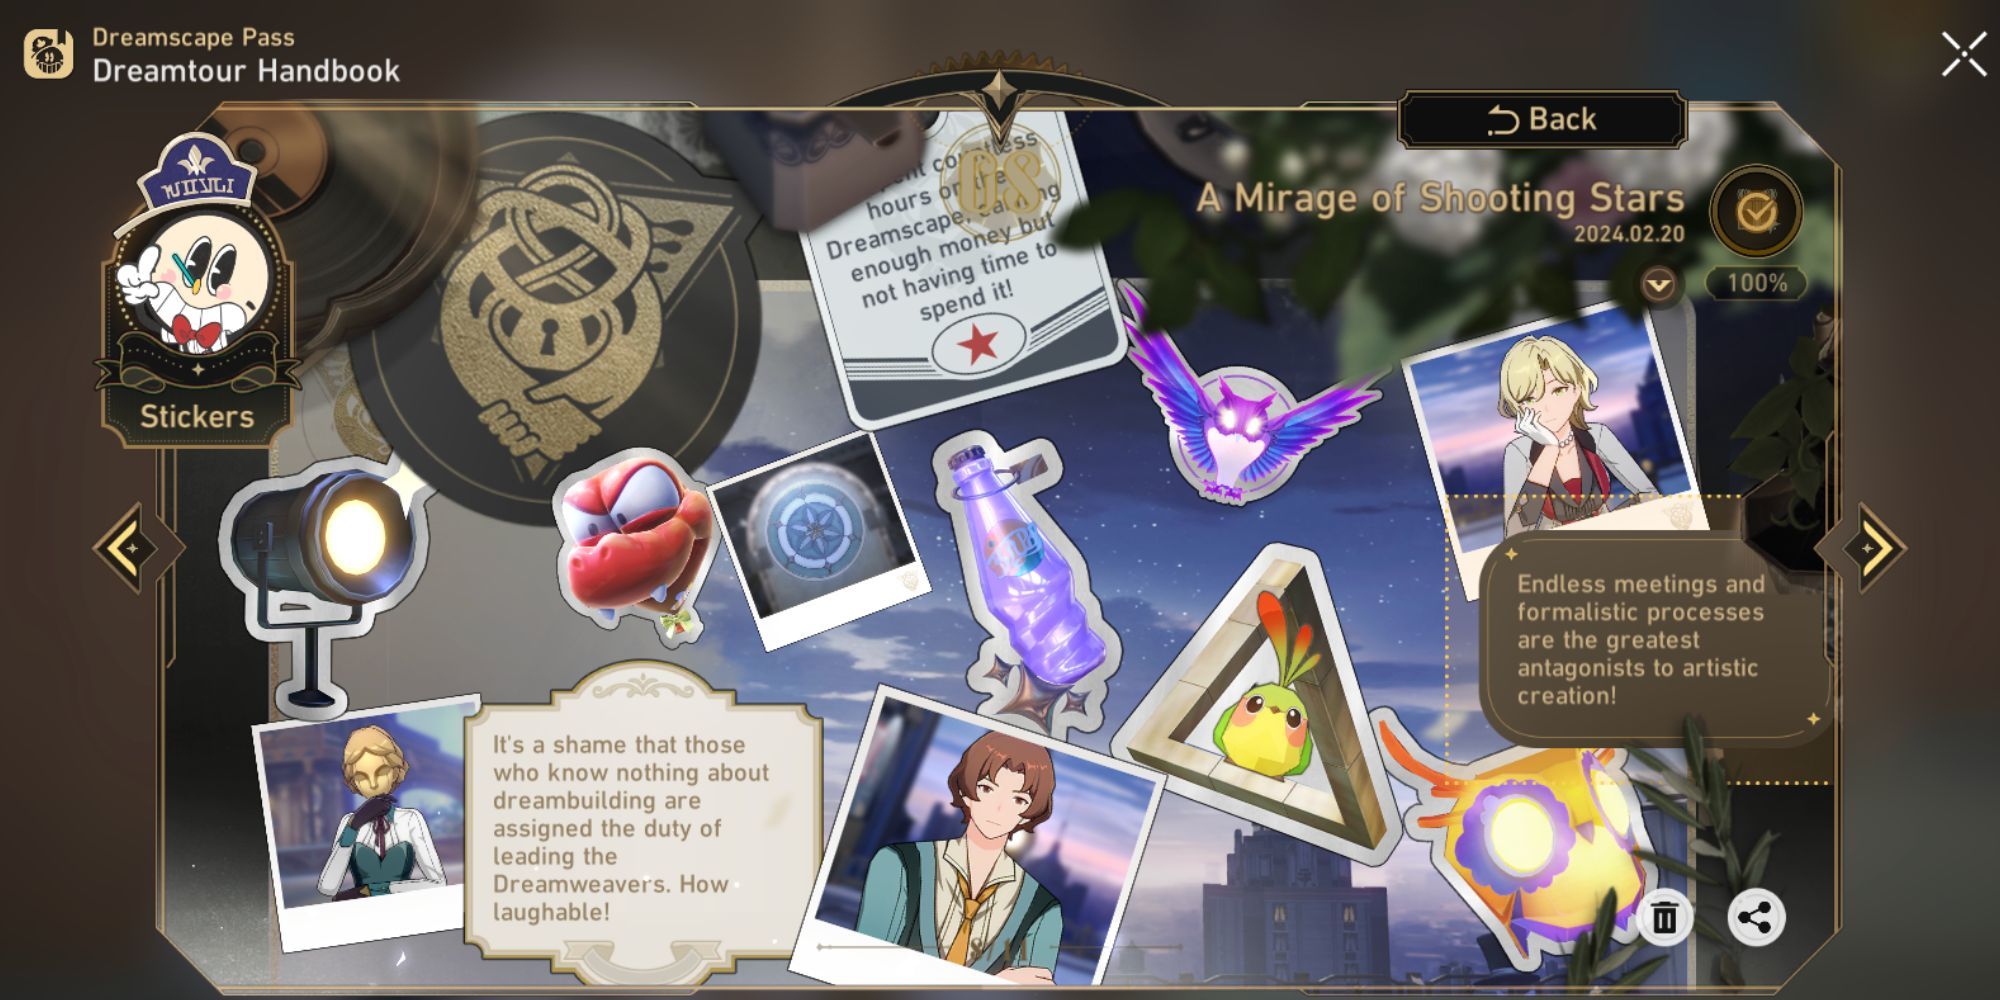 Honkai Star Rail - A Mirage Of Shooting Stars Dreamscape Pass Sticker Locations (Chapter 8) Featured Image